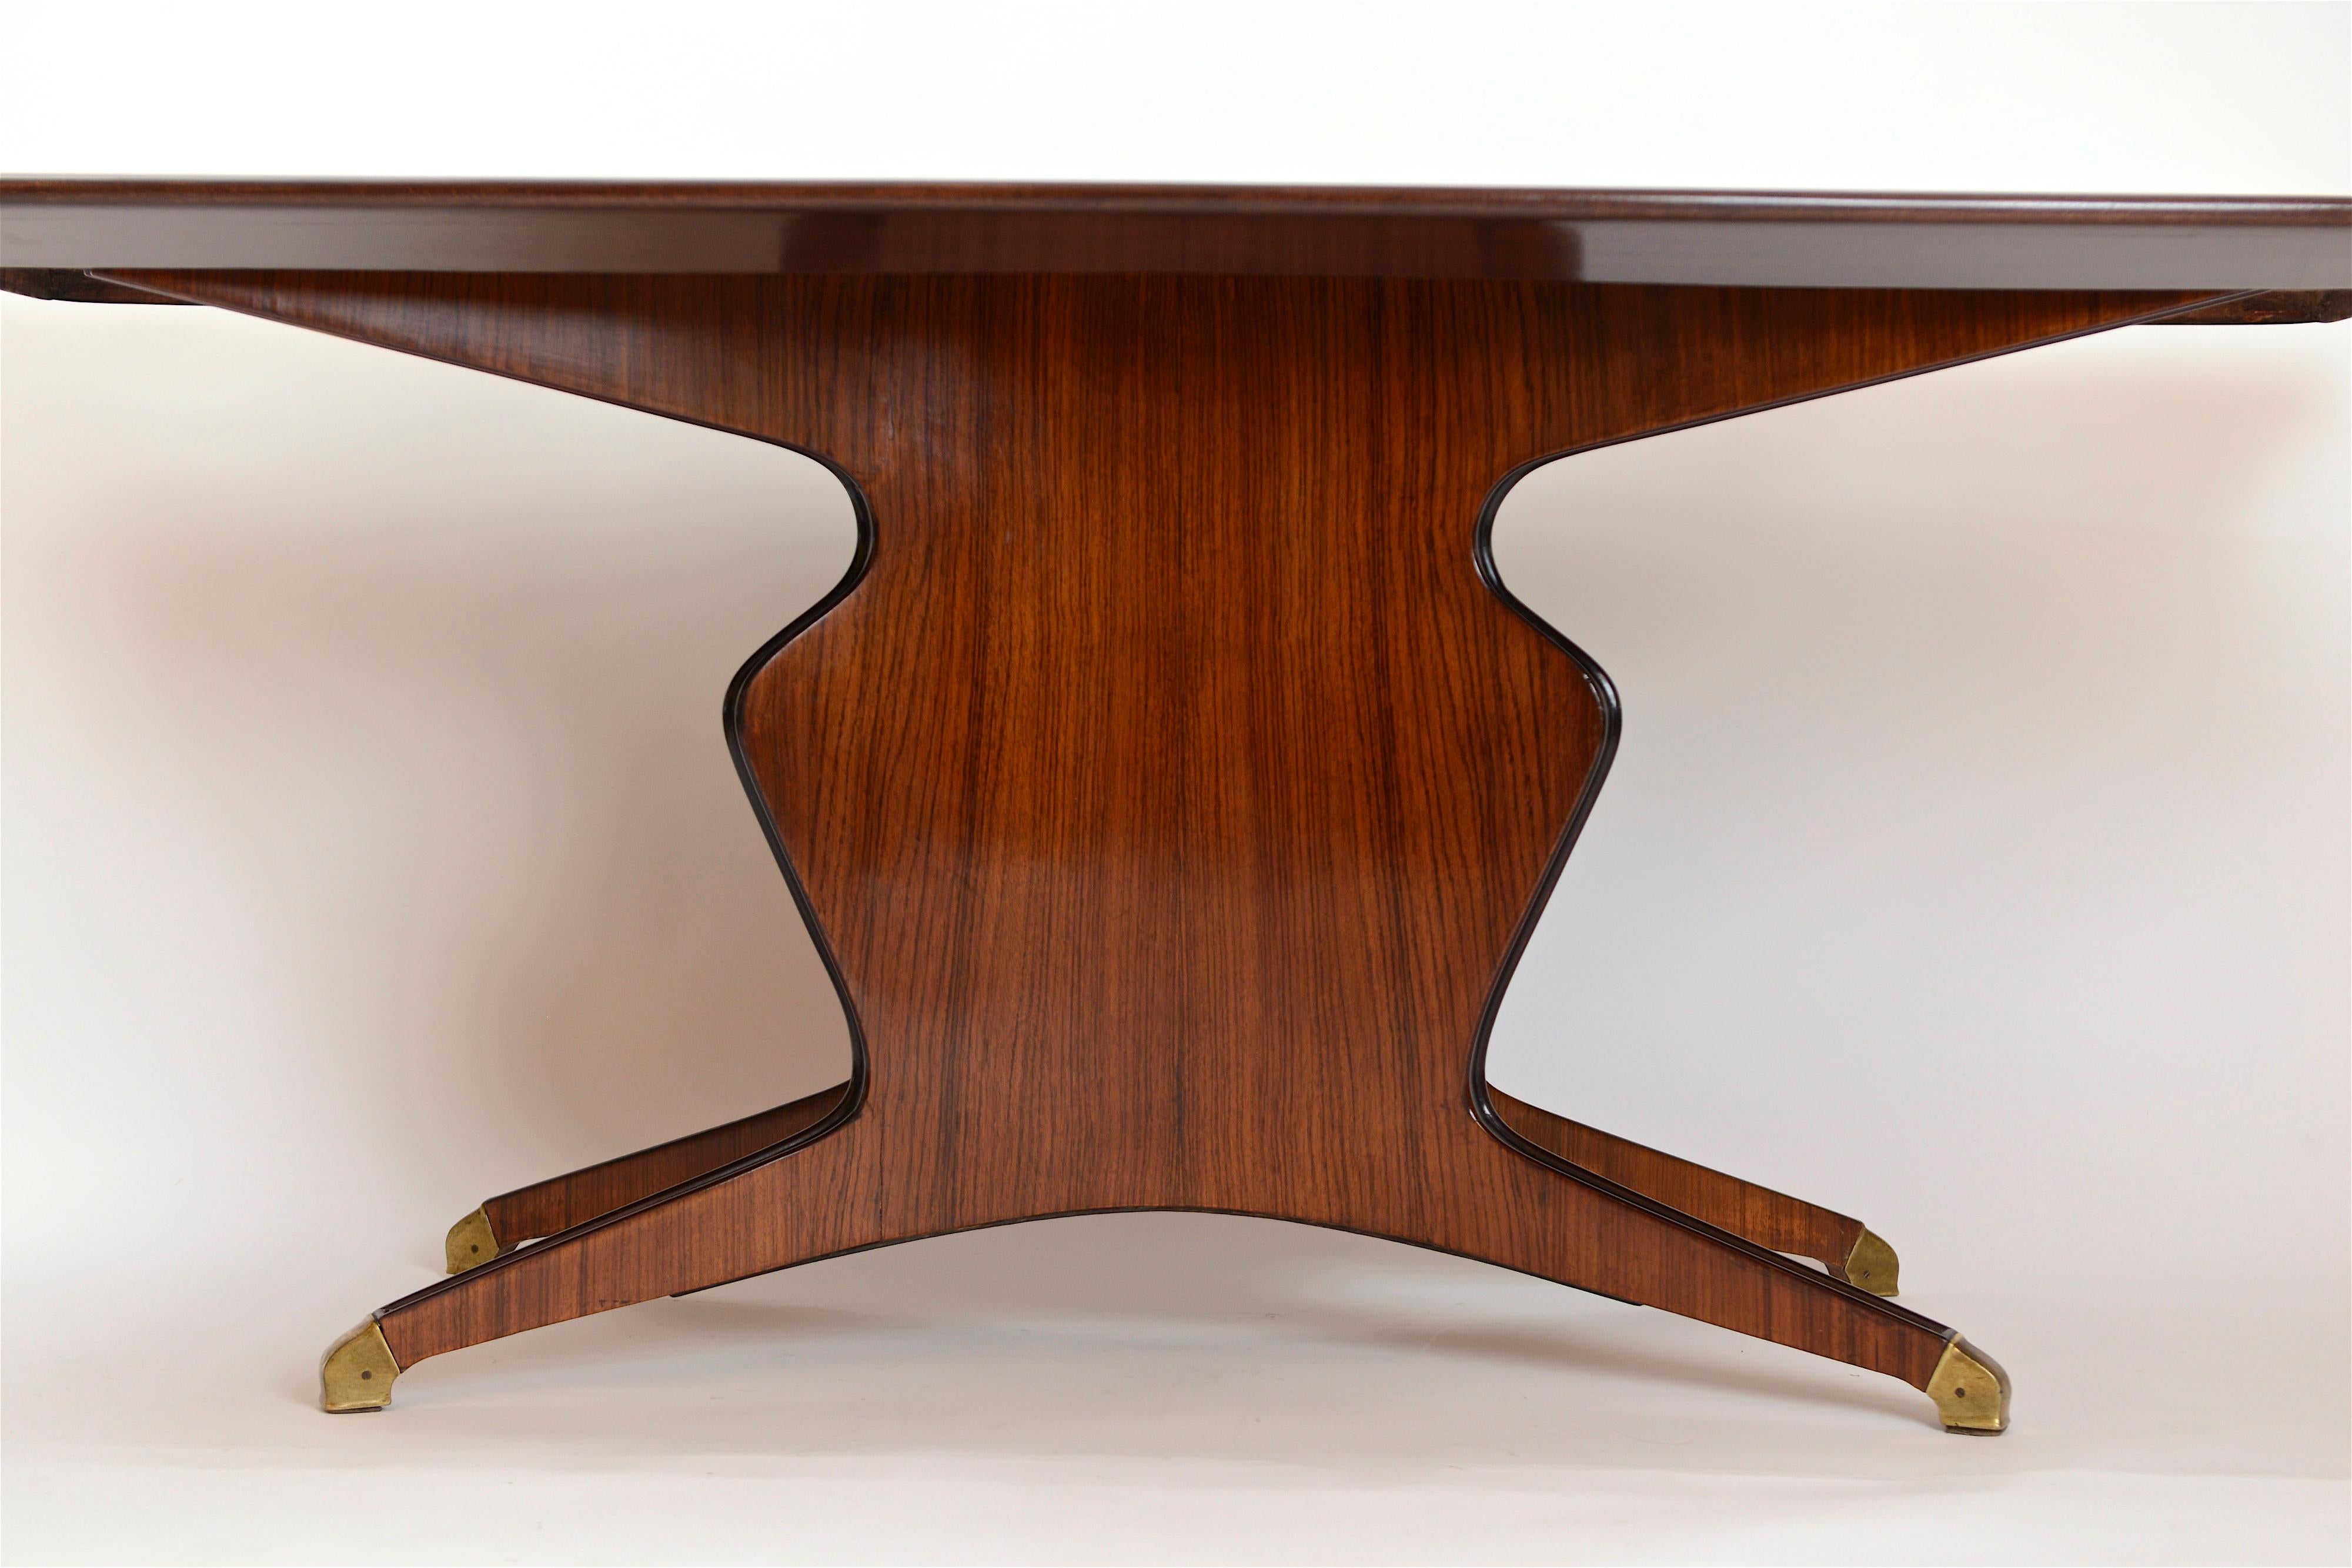 A beautifully veneered rosewood and mahogany dining table by Arredamenti Borsani Varedo, Italy, circa 1950. The wonderful curvature and elegant lines of this table are complemented by the original gold back-painted glass insert. Comfortably